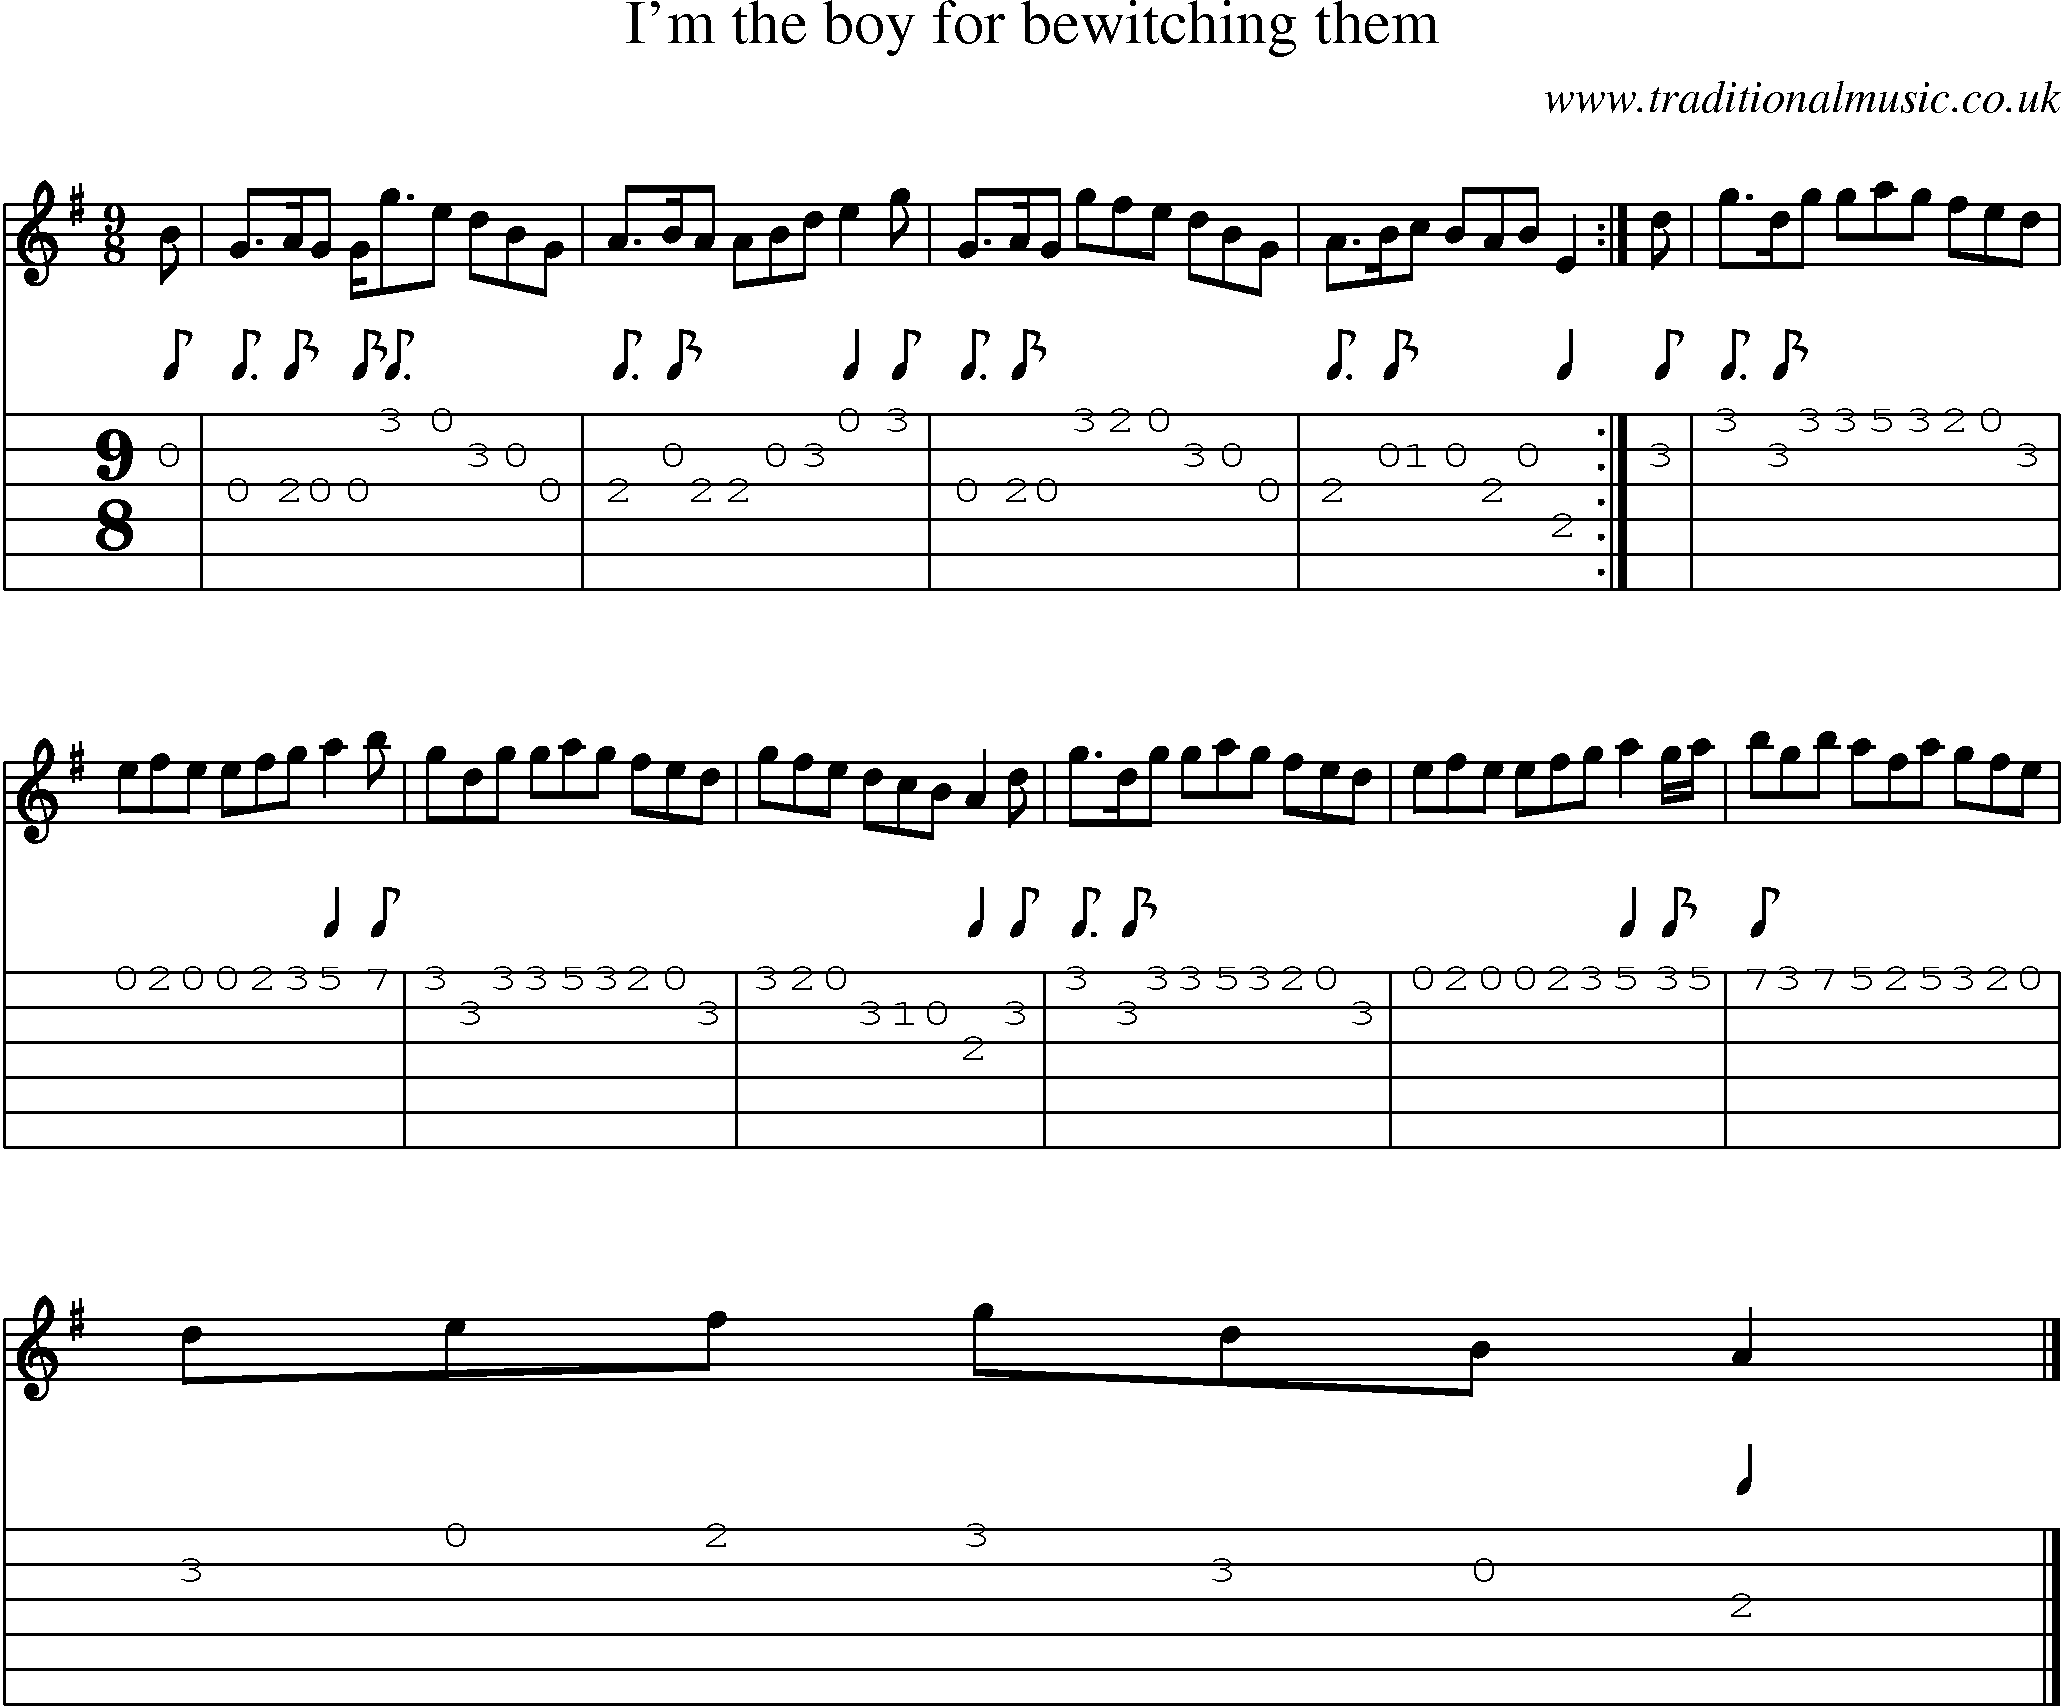 Music Score and Guitar Tabs for Im The Boy For Bewitching Them